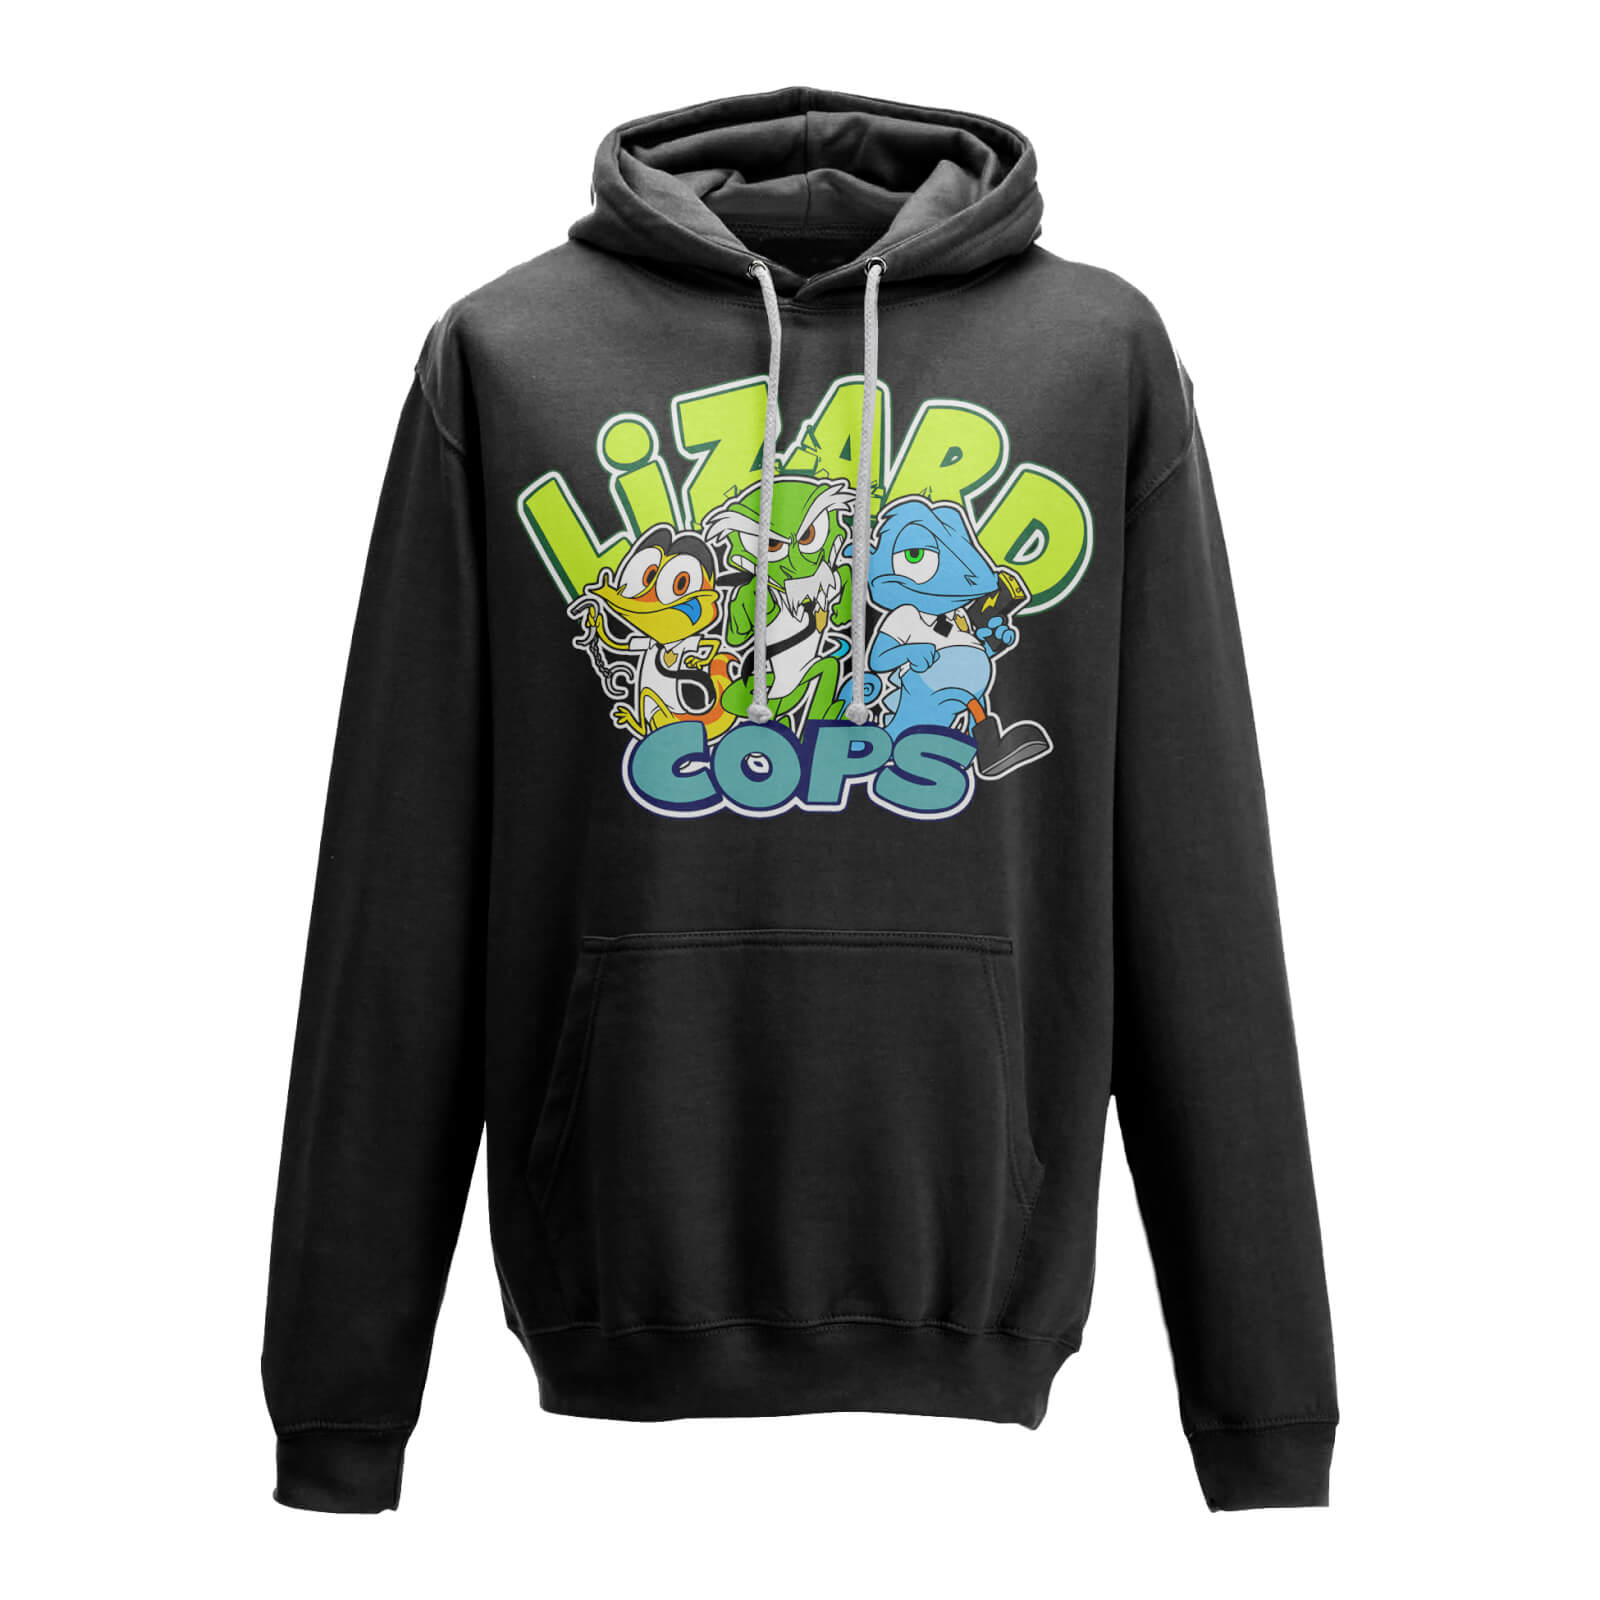 Click to view product details and reviews for Lizard Cops Hoodie Black Kids L 9 11 Years.